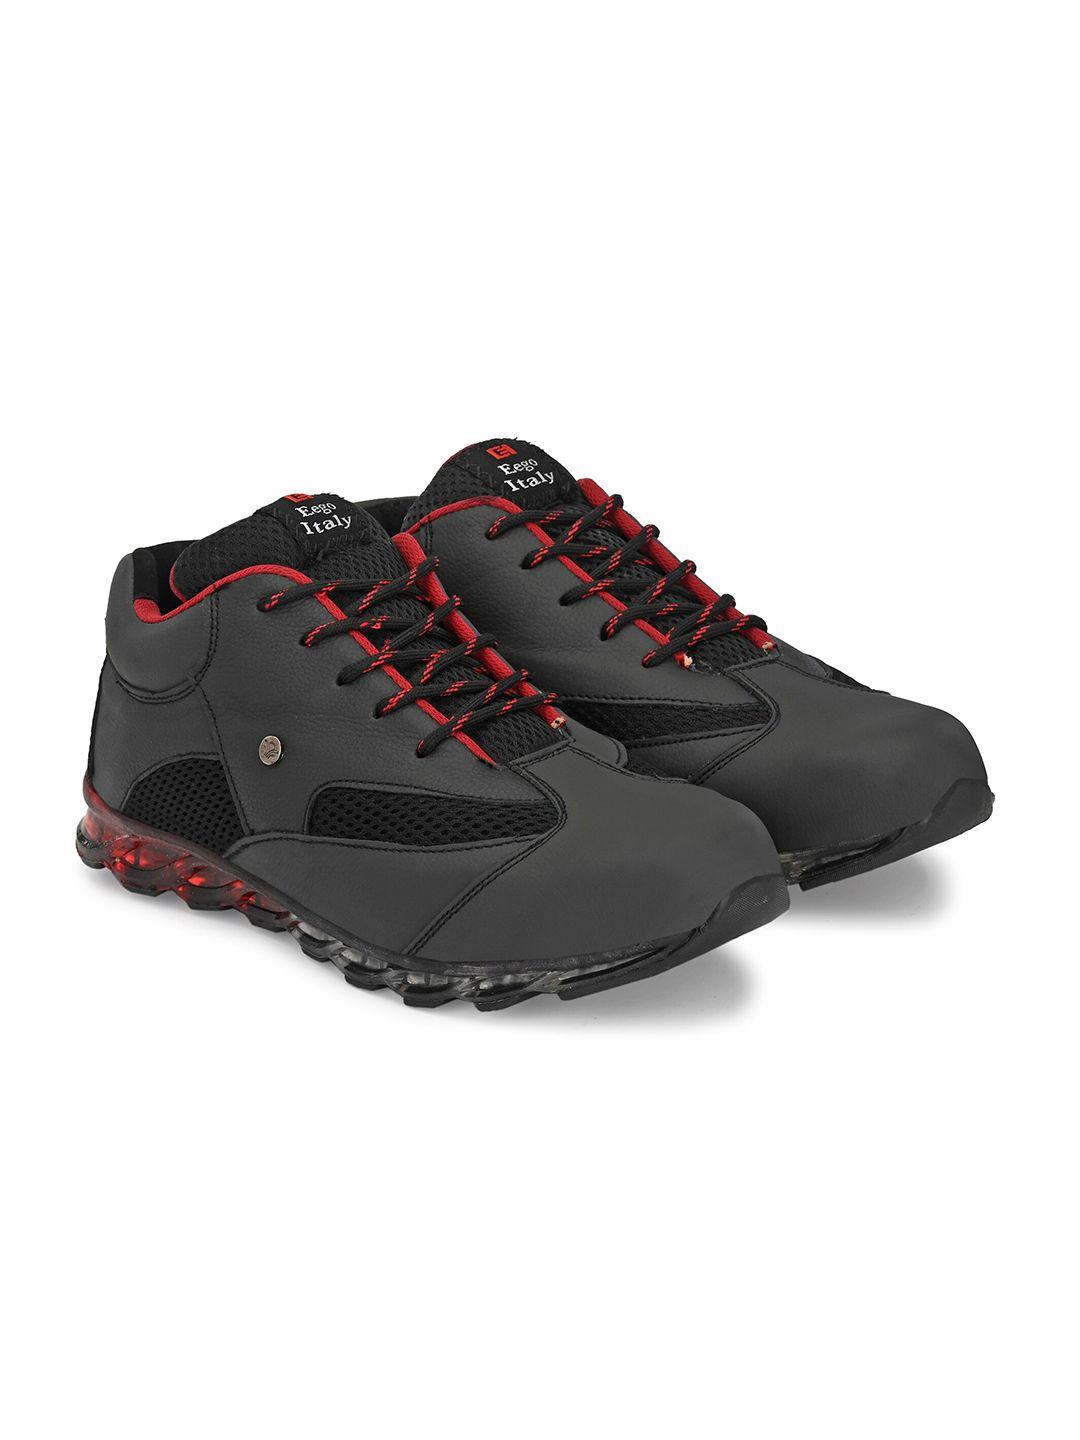 eego italy men black sports shoes